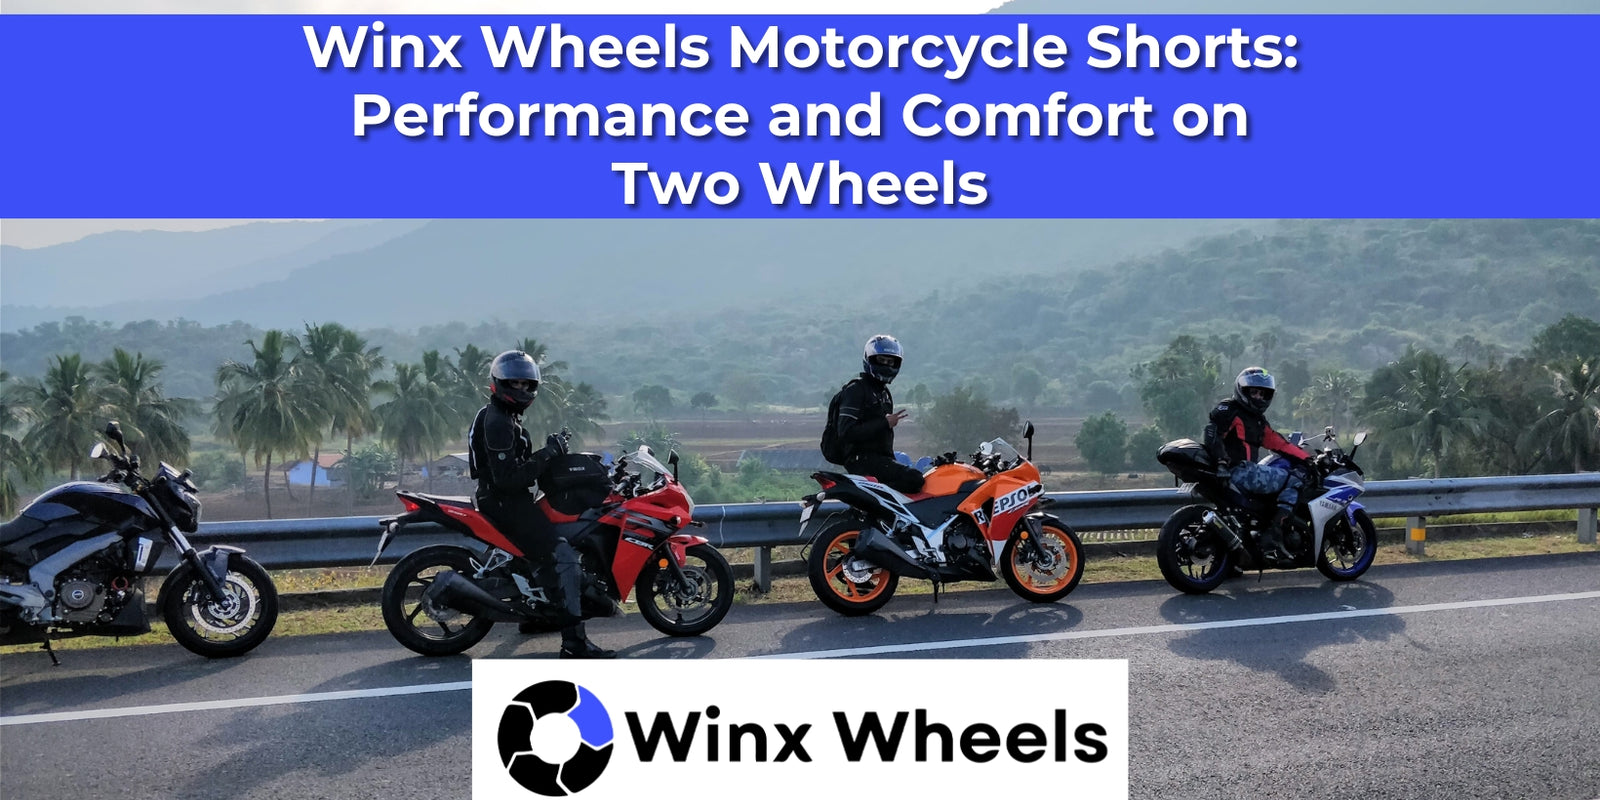 Winx Wheels Motorcycle Shorts Performance and Comfort on Two Wheels